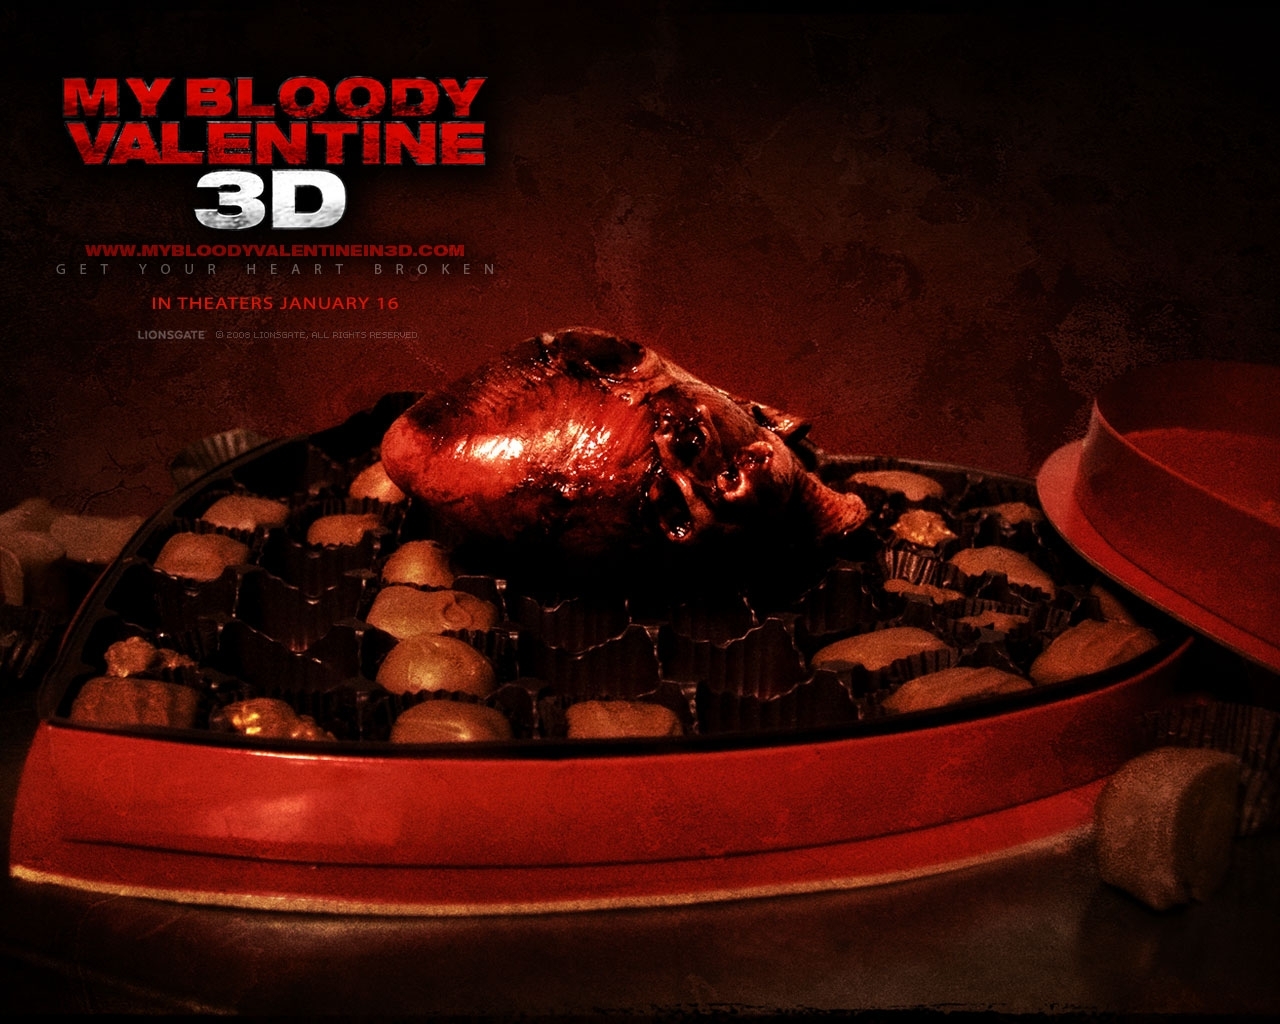 http://images2.fanpop.com/images/photos/8000000/My-Bloody-Valentine-2009-horror-movies-8036633-1280-1024.jpg